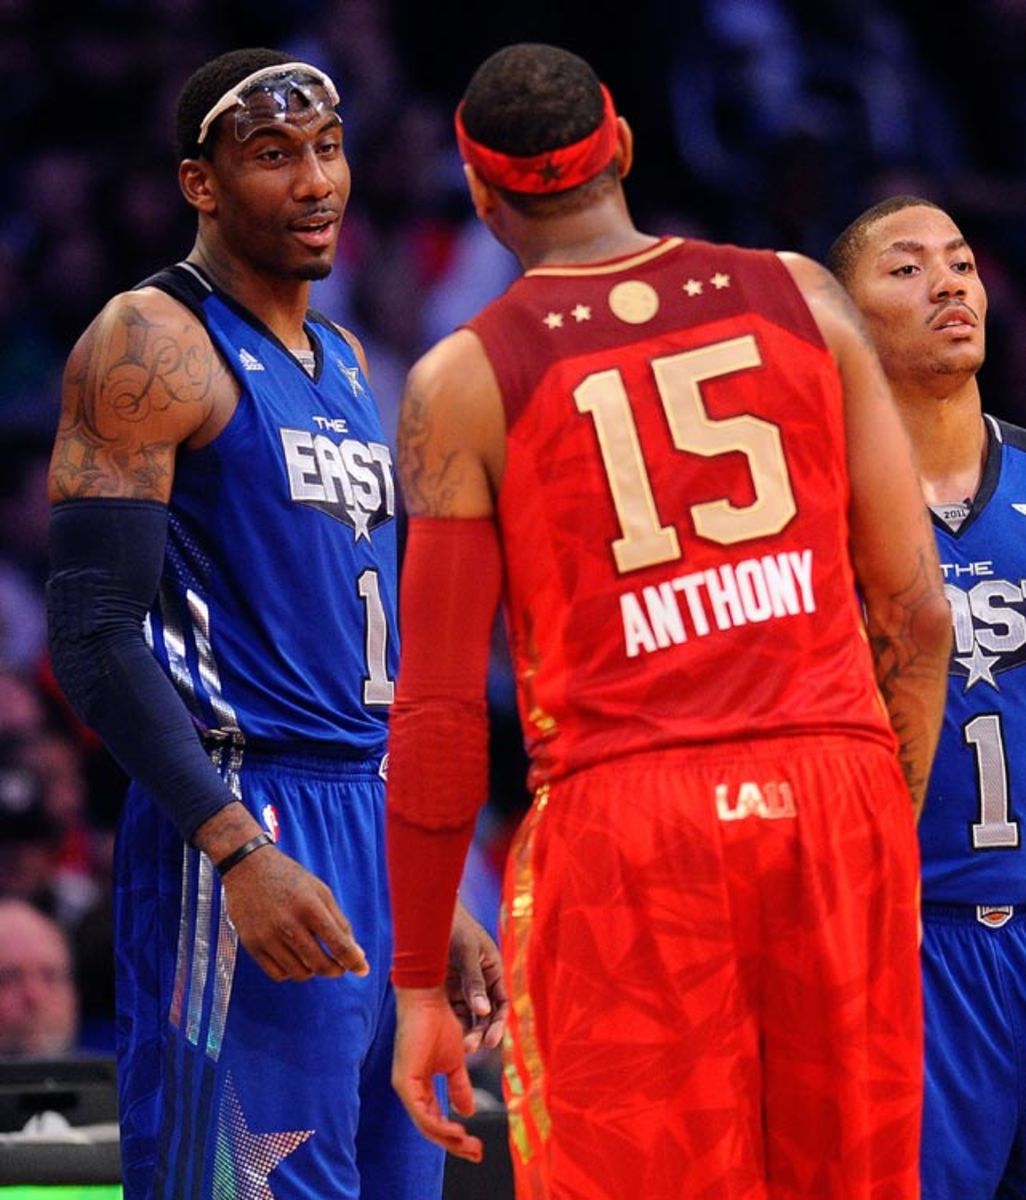 Amar'e Stoudemire and Carmelo Anthony